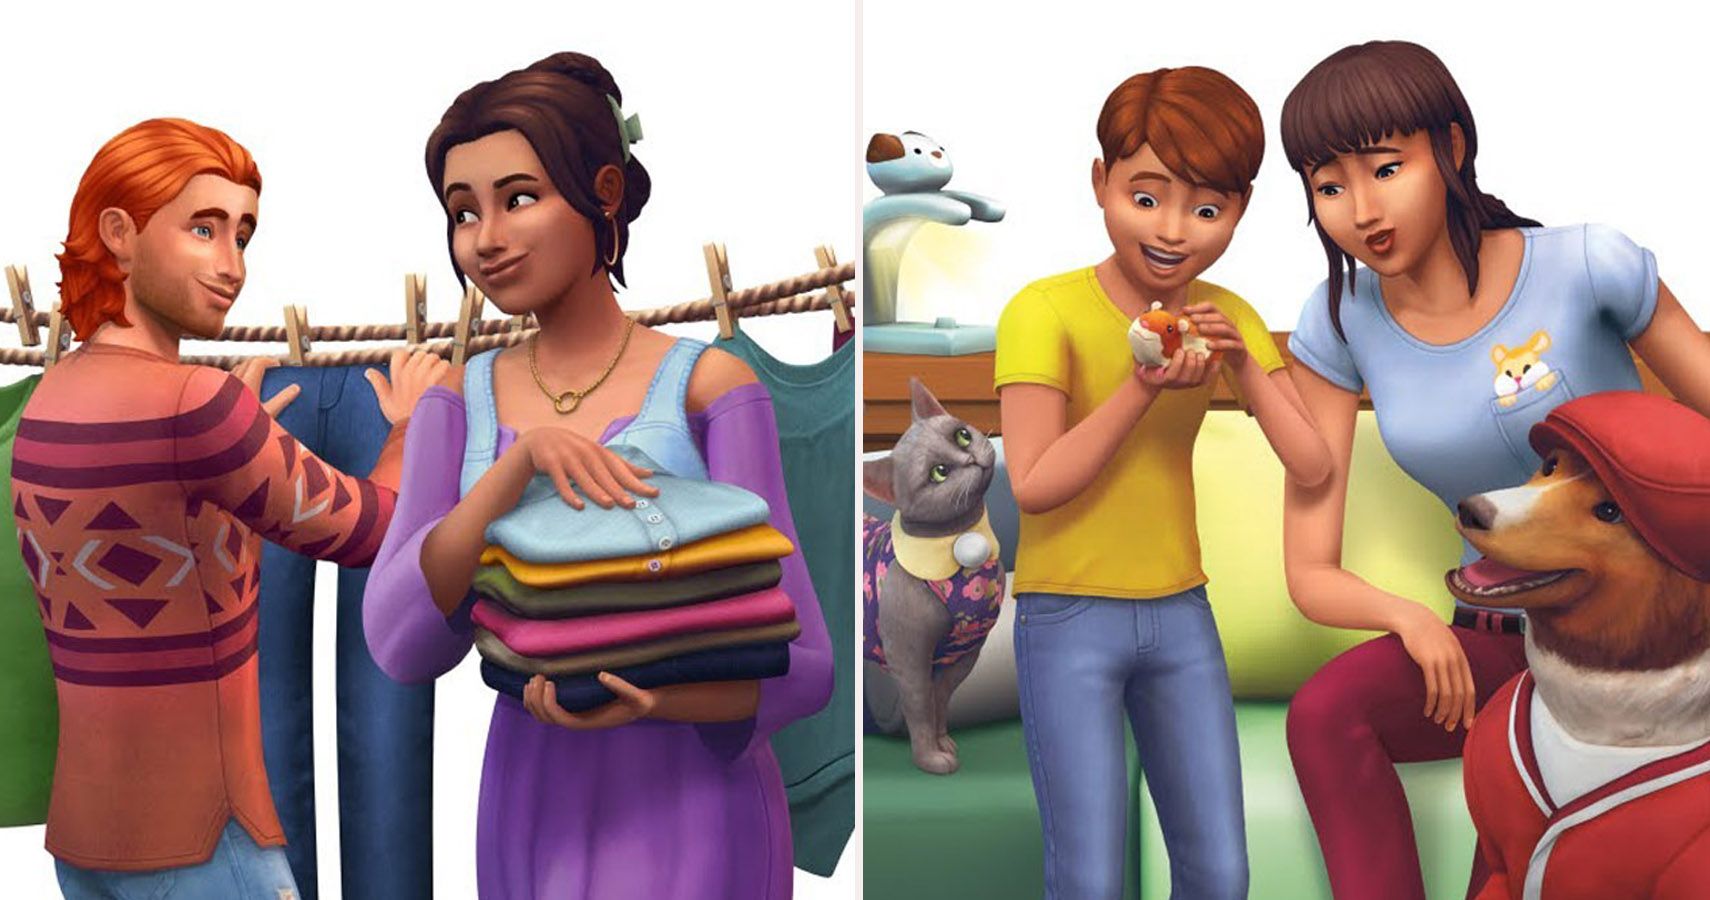 The Sims 4: Stuff Packs Overview - Ultimate Sims Guides